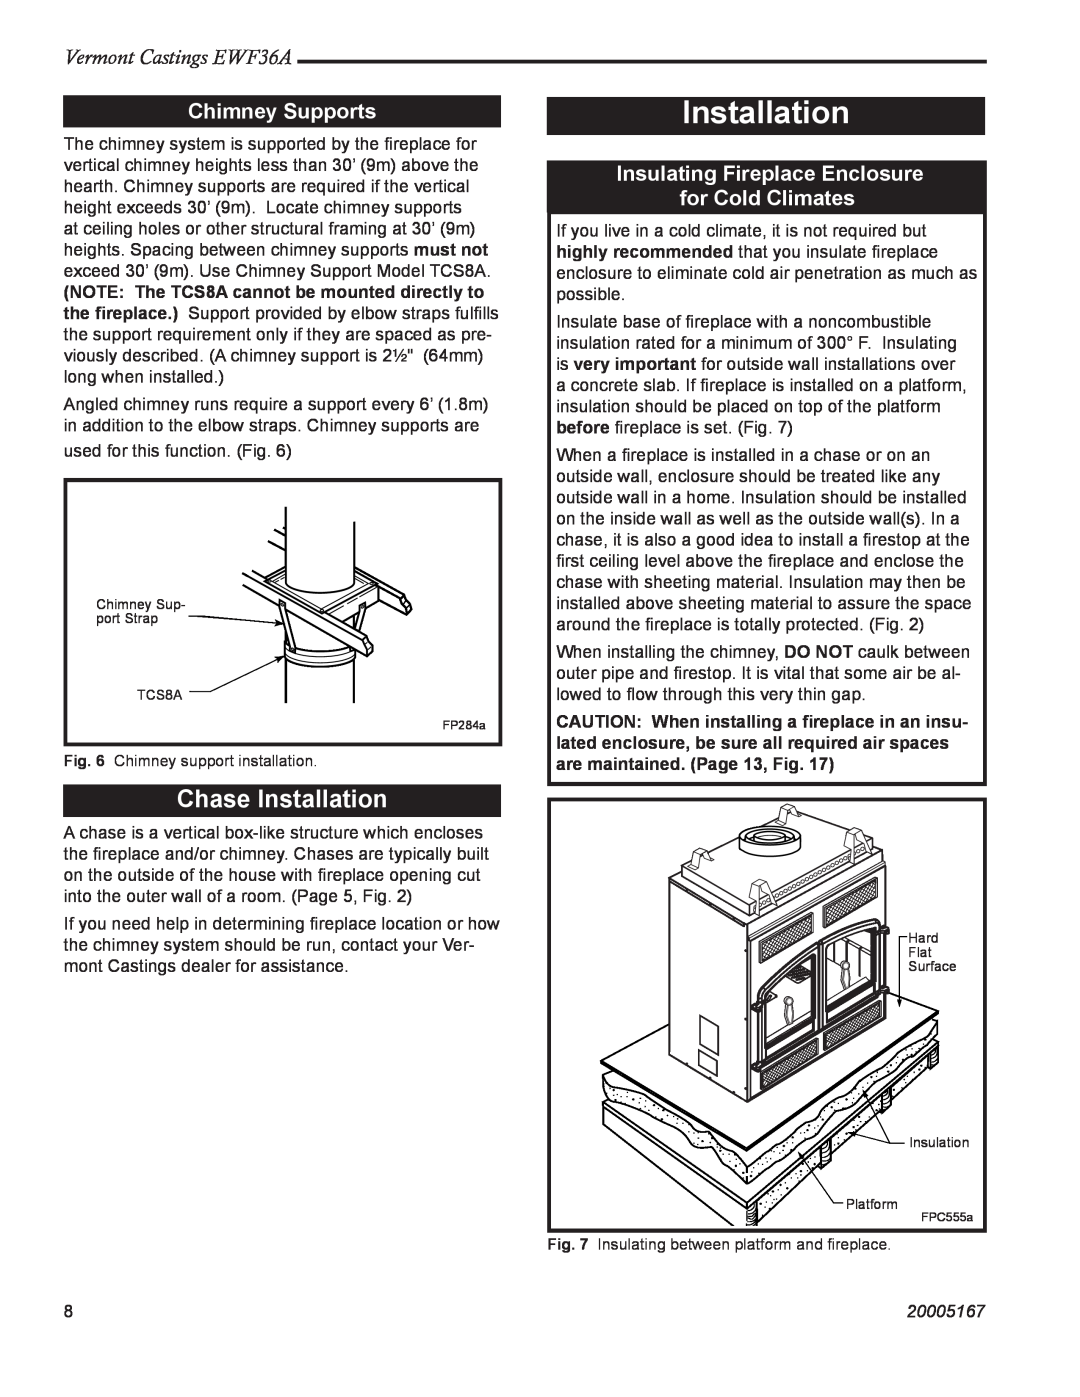 MHP EWF36A manual Chase Installation, Chimney Supports, Insulating Fireplace Enclosure for Cold Climates, 20005167 